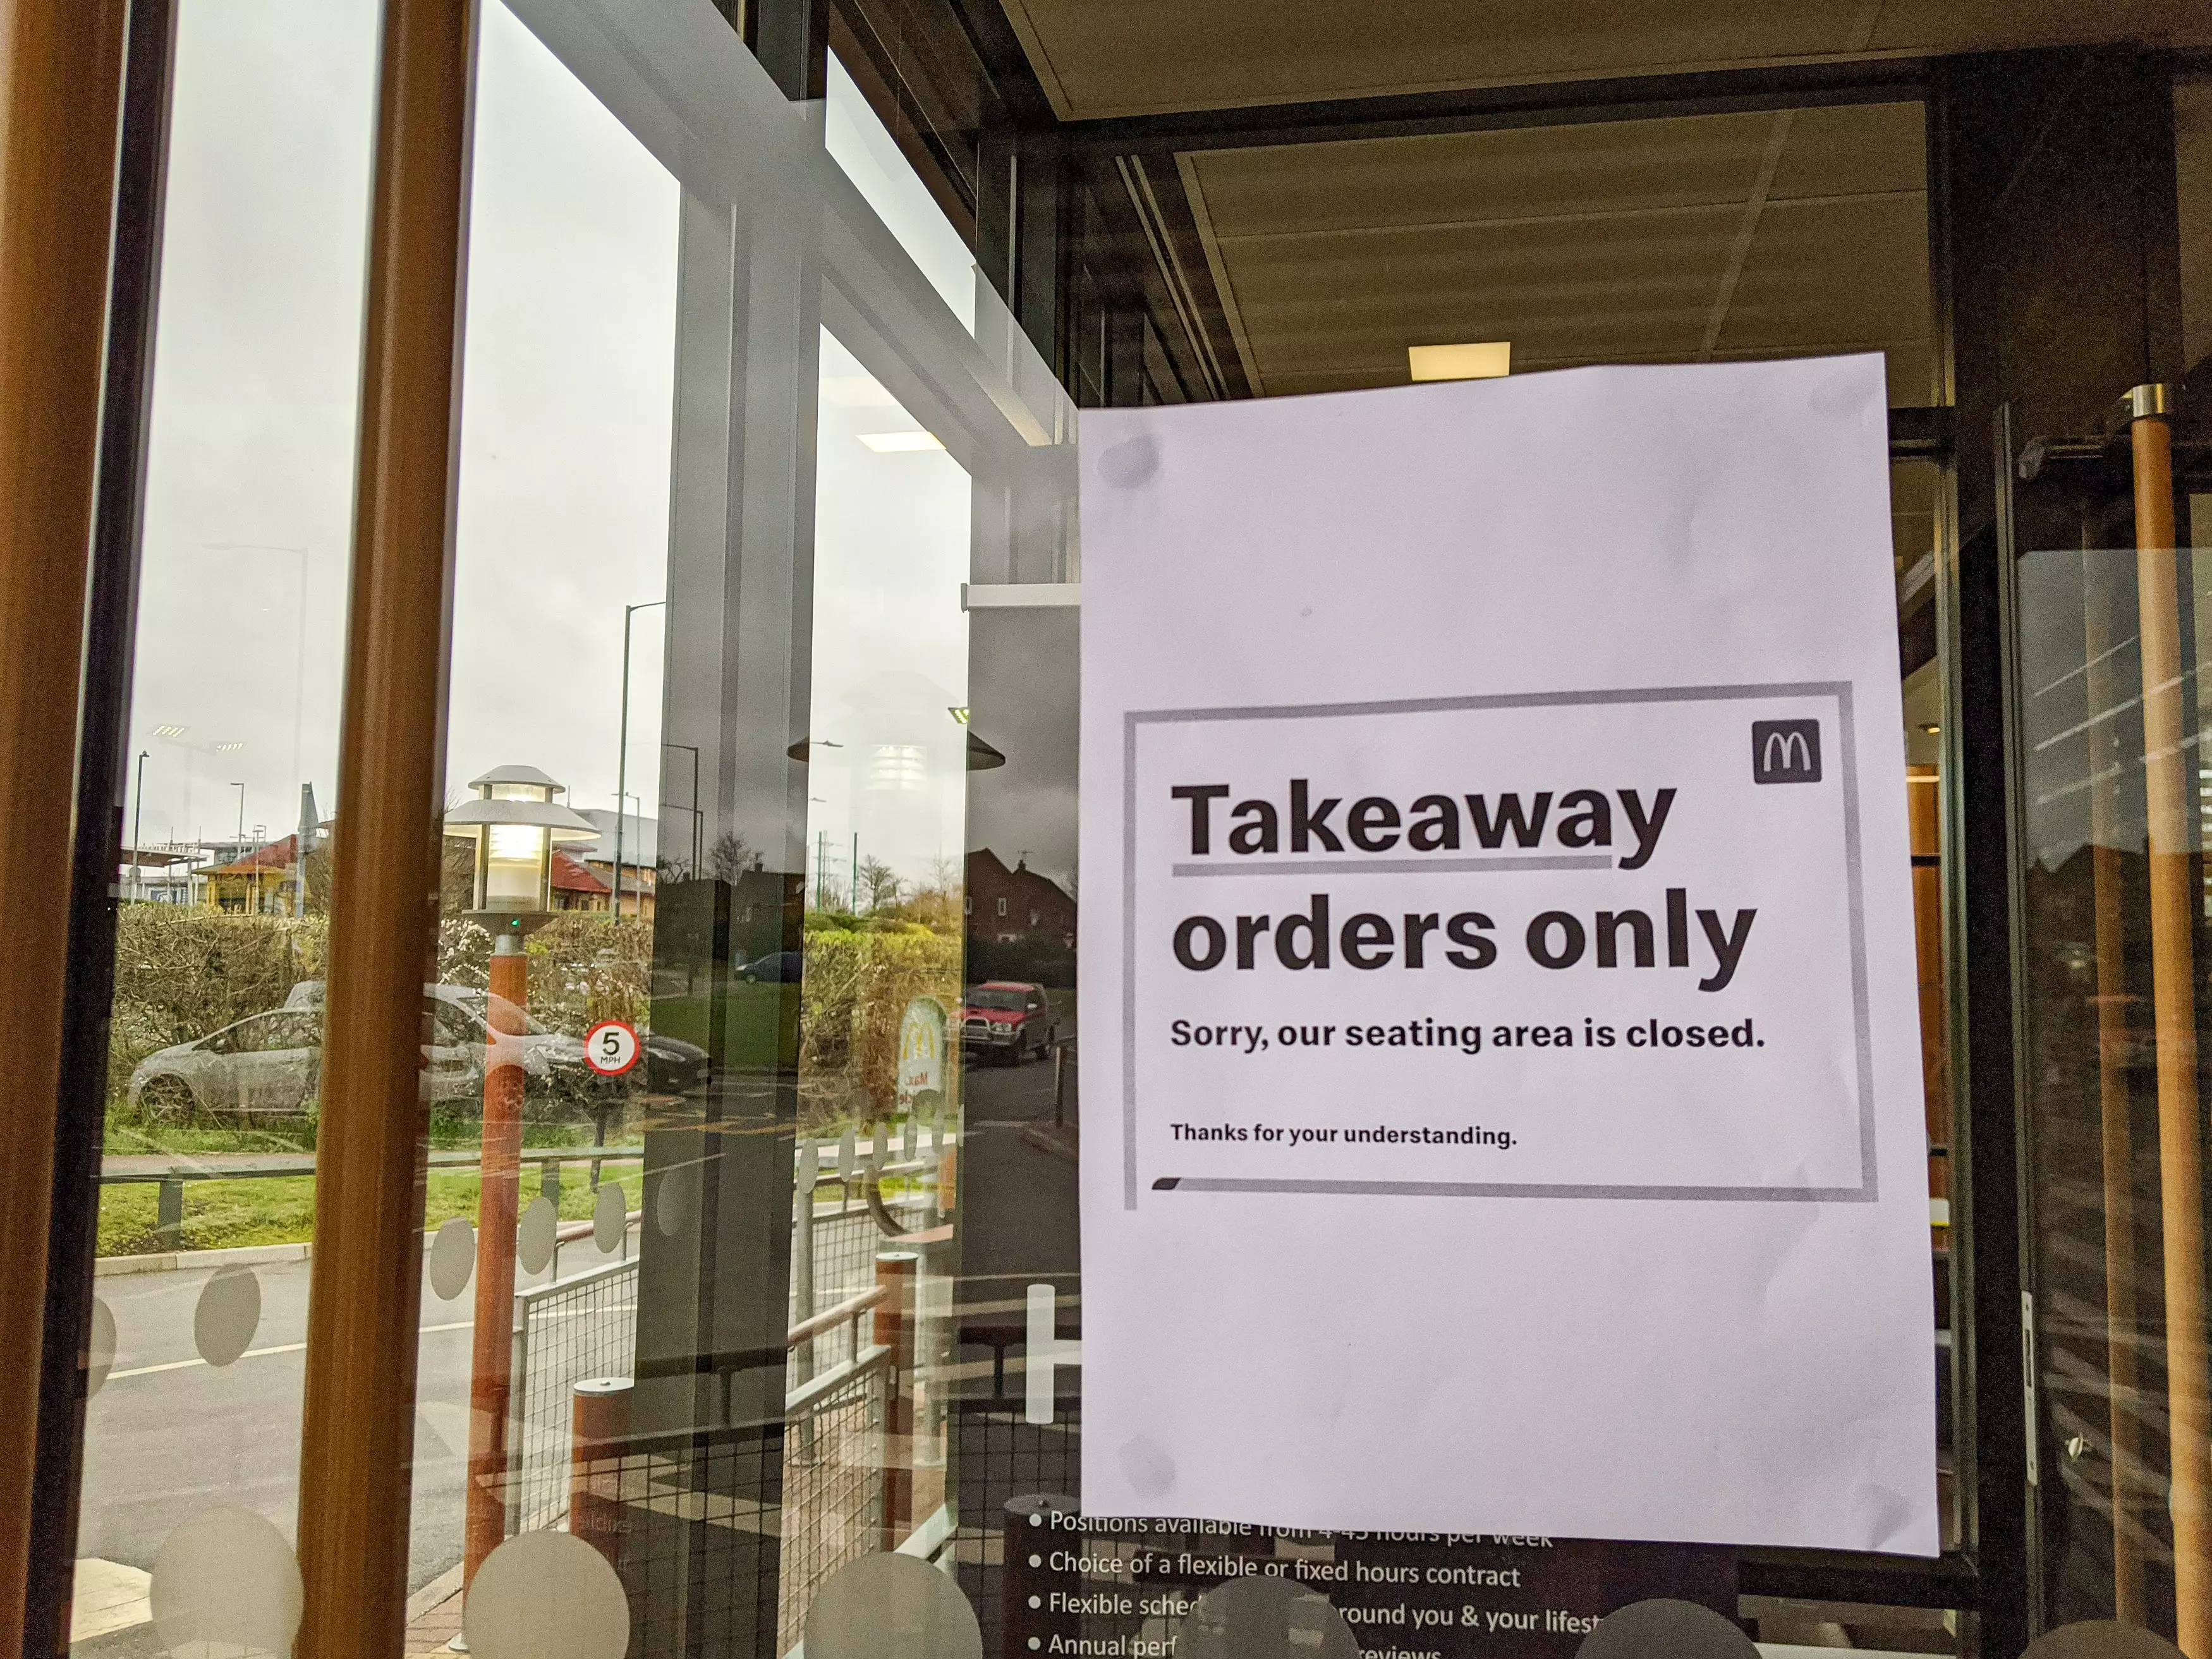 McDonald's had offered a takeaway and drive thru service from Wednesday, but now all outlets in the UK and Ireland are set to close.